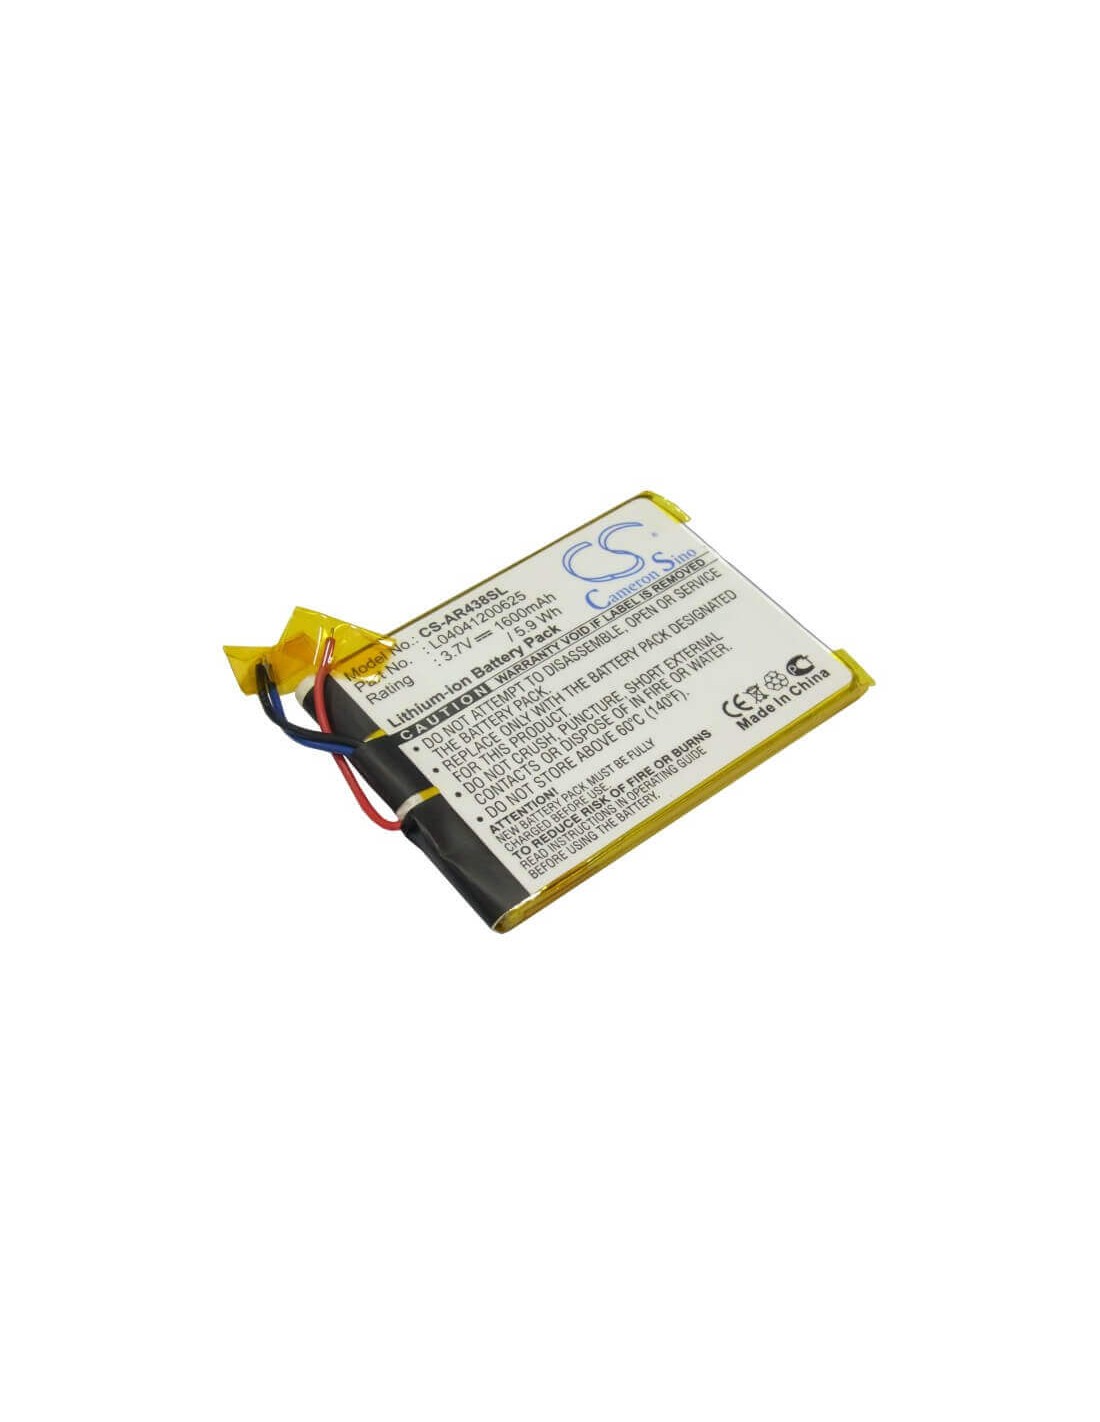 Battery for Archos 43 Internet Tablet, A43it, A43it 8gb 3.7V, 1600mAh - 5.92Wh